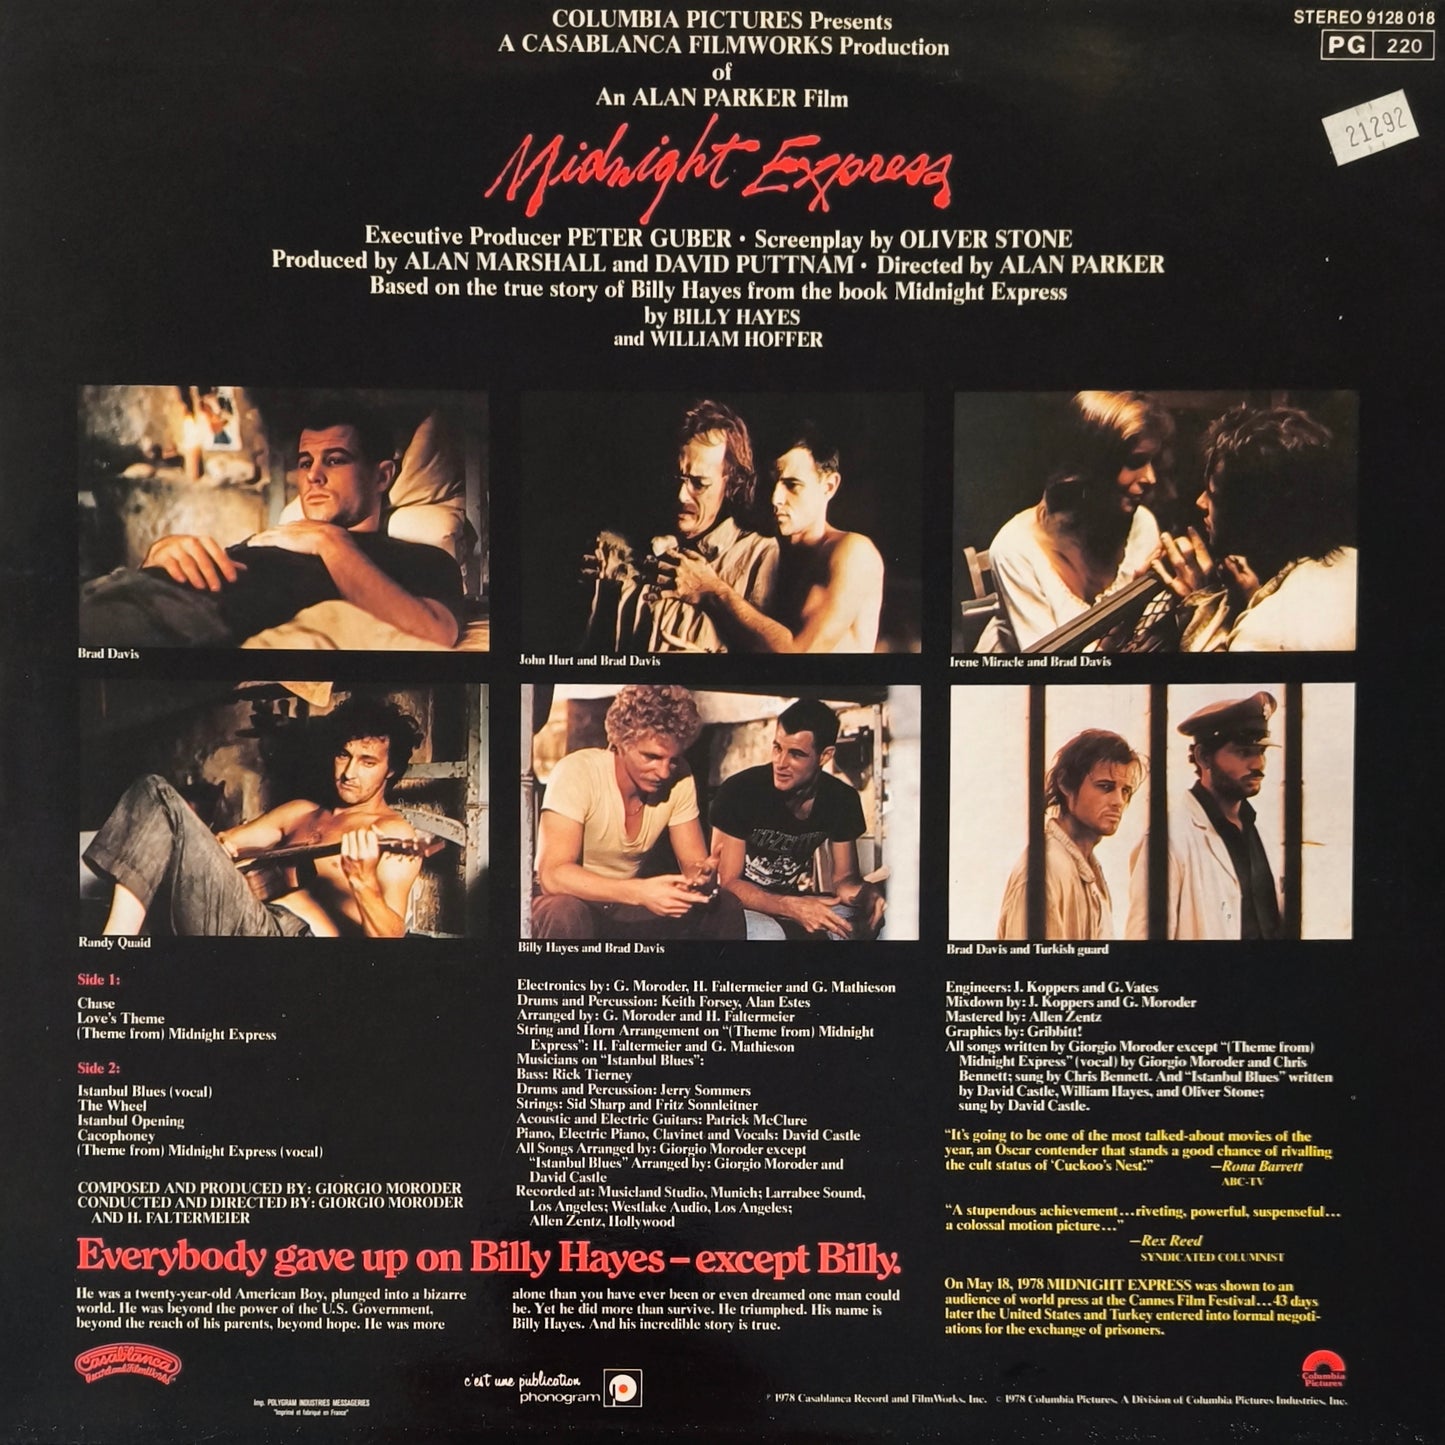 GIORGIO MORODER - Midnight Express (Music From The Original Motion Picture Soundtrack)